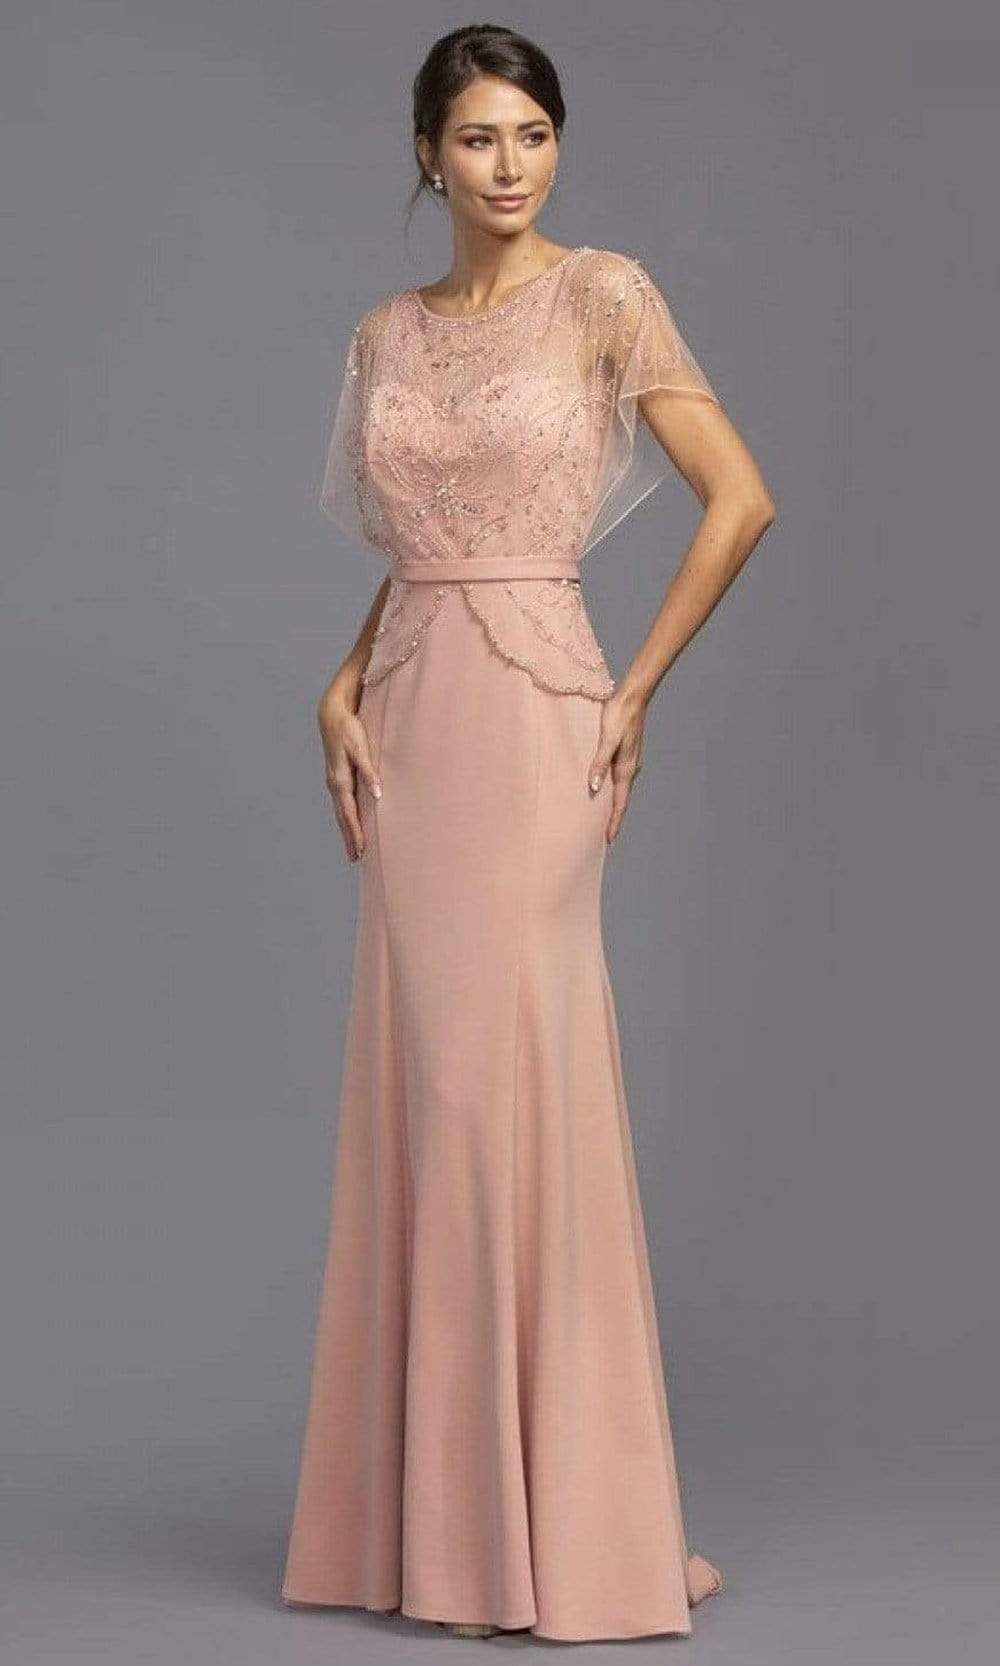 Aspeed Design - M2136 Modest Pearl Embellished Sheath Dress Mother of the Bride Dresses XXS / Champagne